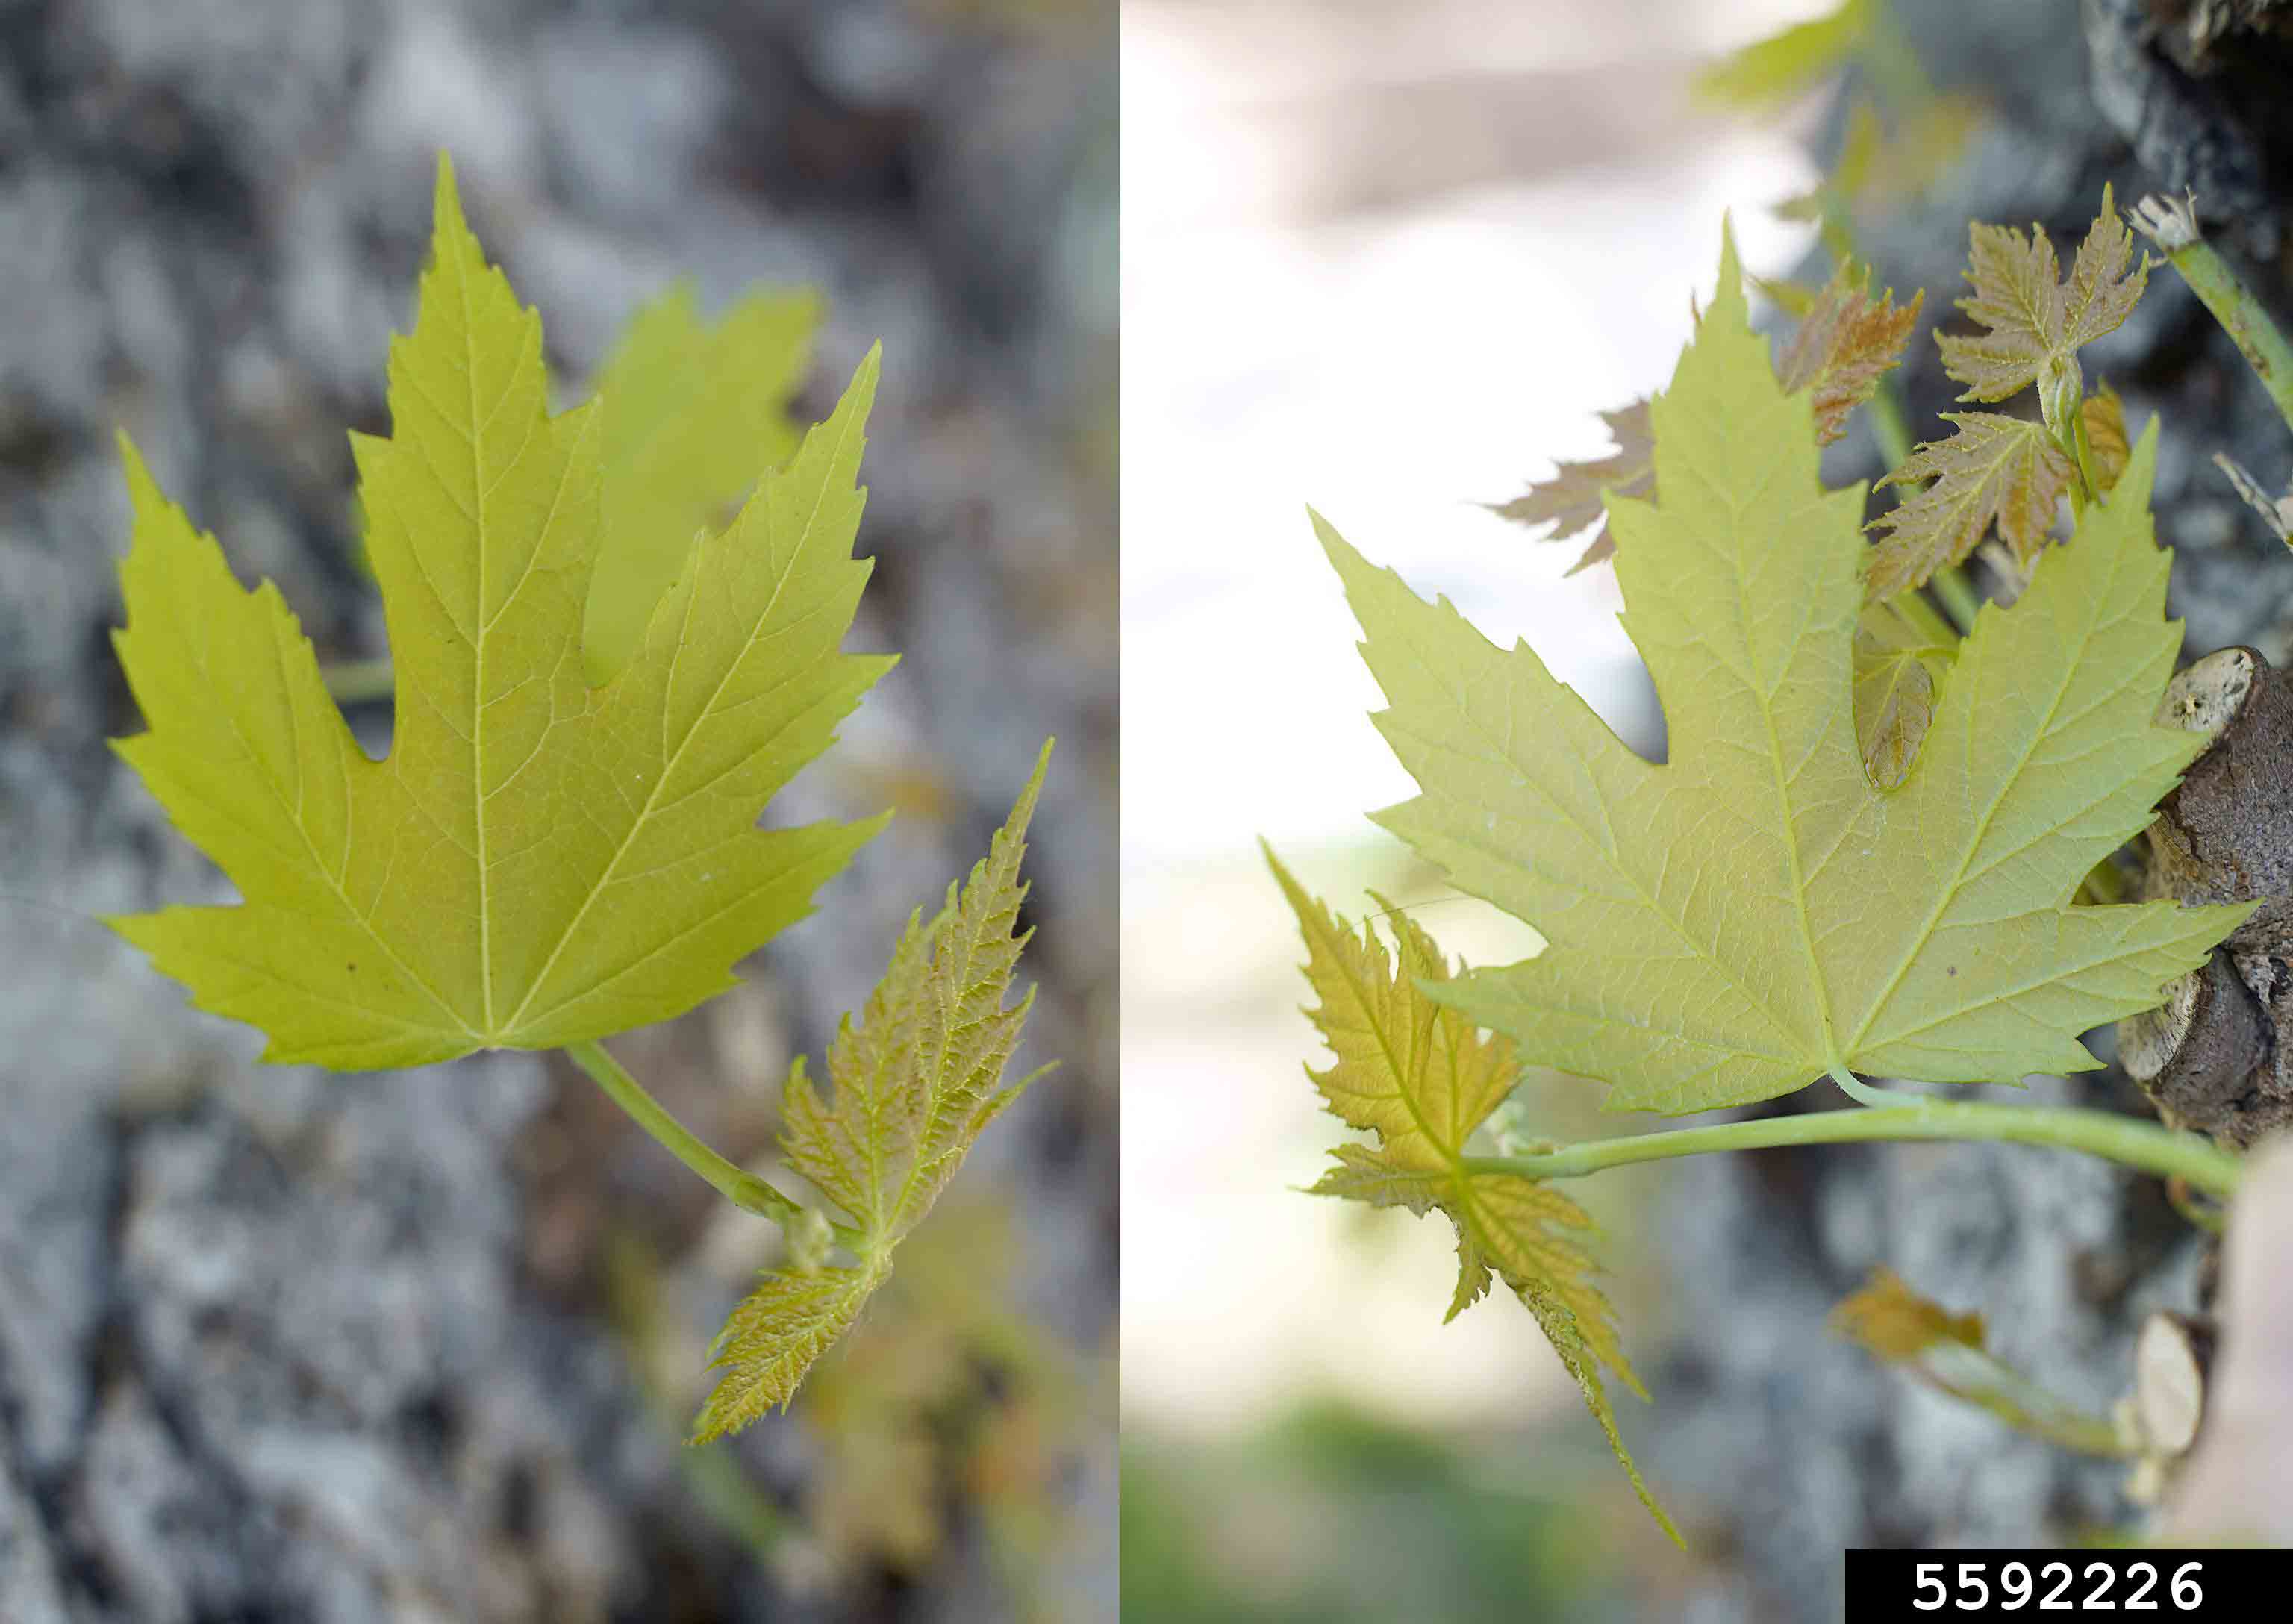 New silver maple leaves, showing upper side and underside